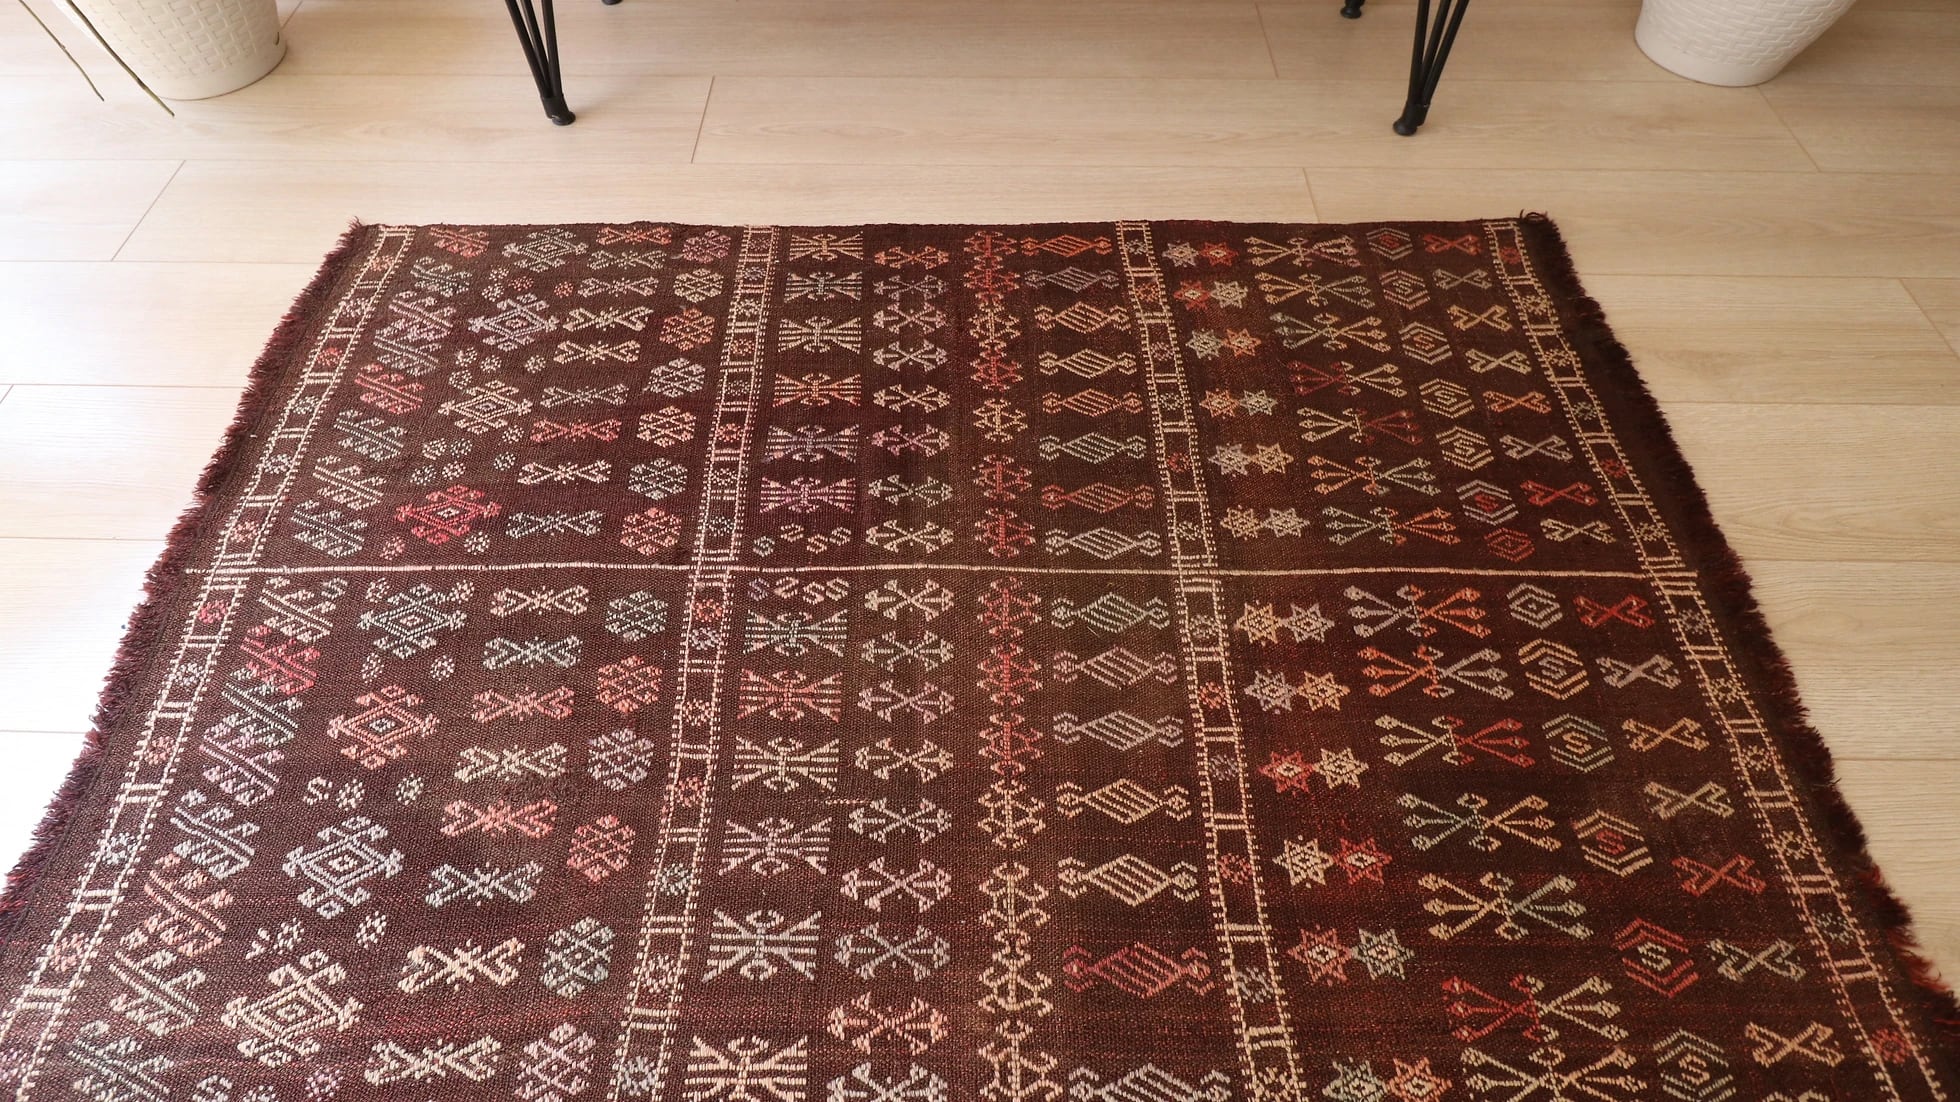 mid-century handmade moroccan flat-woven Kilim Rug with tribal motifs in muted earthy taupe and terracotta shades measuring 3x5 ft